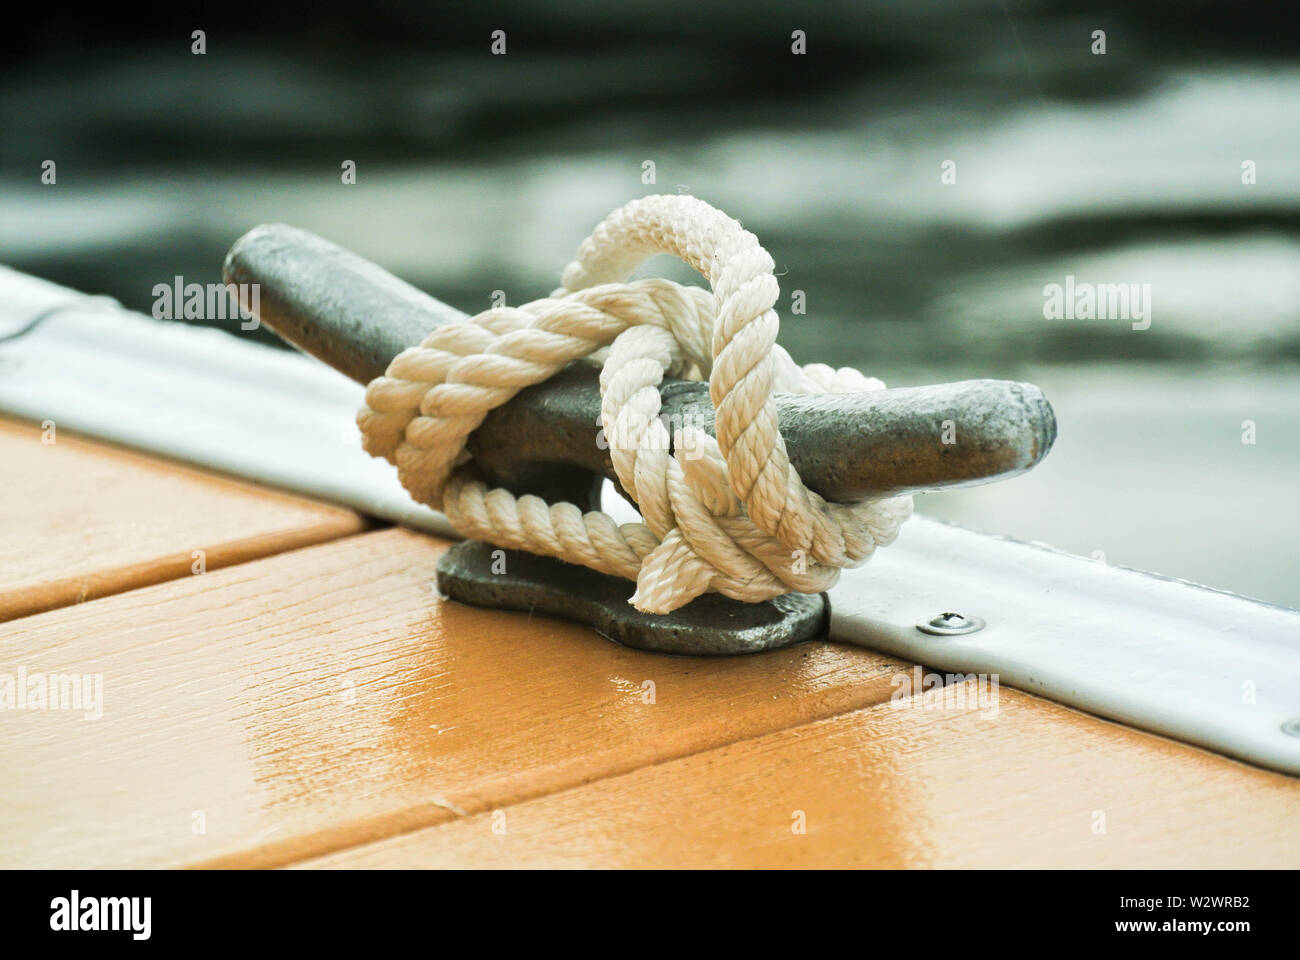 A mooring cleat on a boat slip Stock Photo